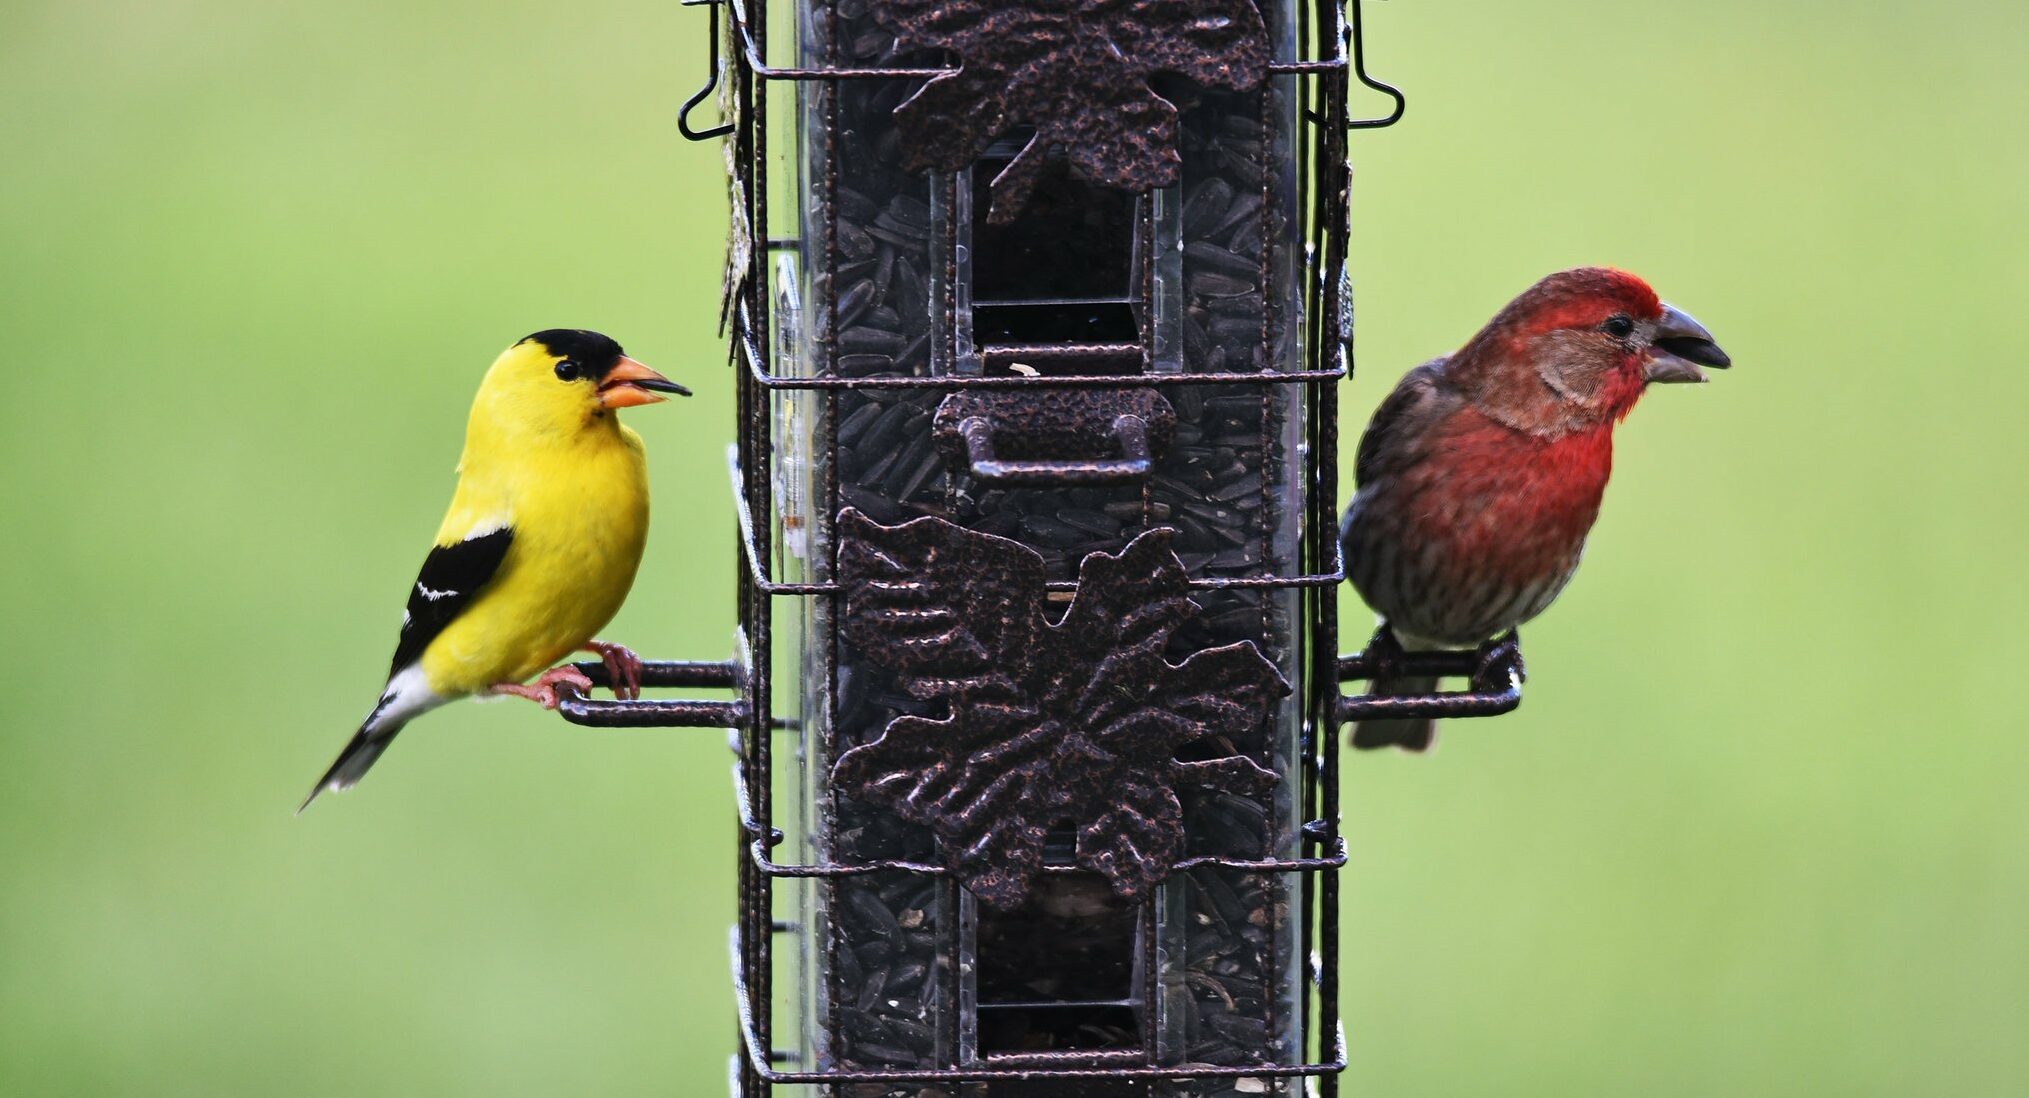 Two birds are perched on a black, metal bird feeder. One bird is yellow, black, and white. The other bird is red and gray.